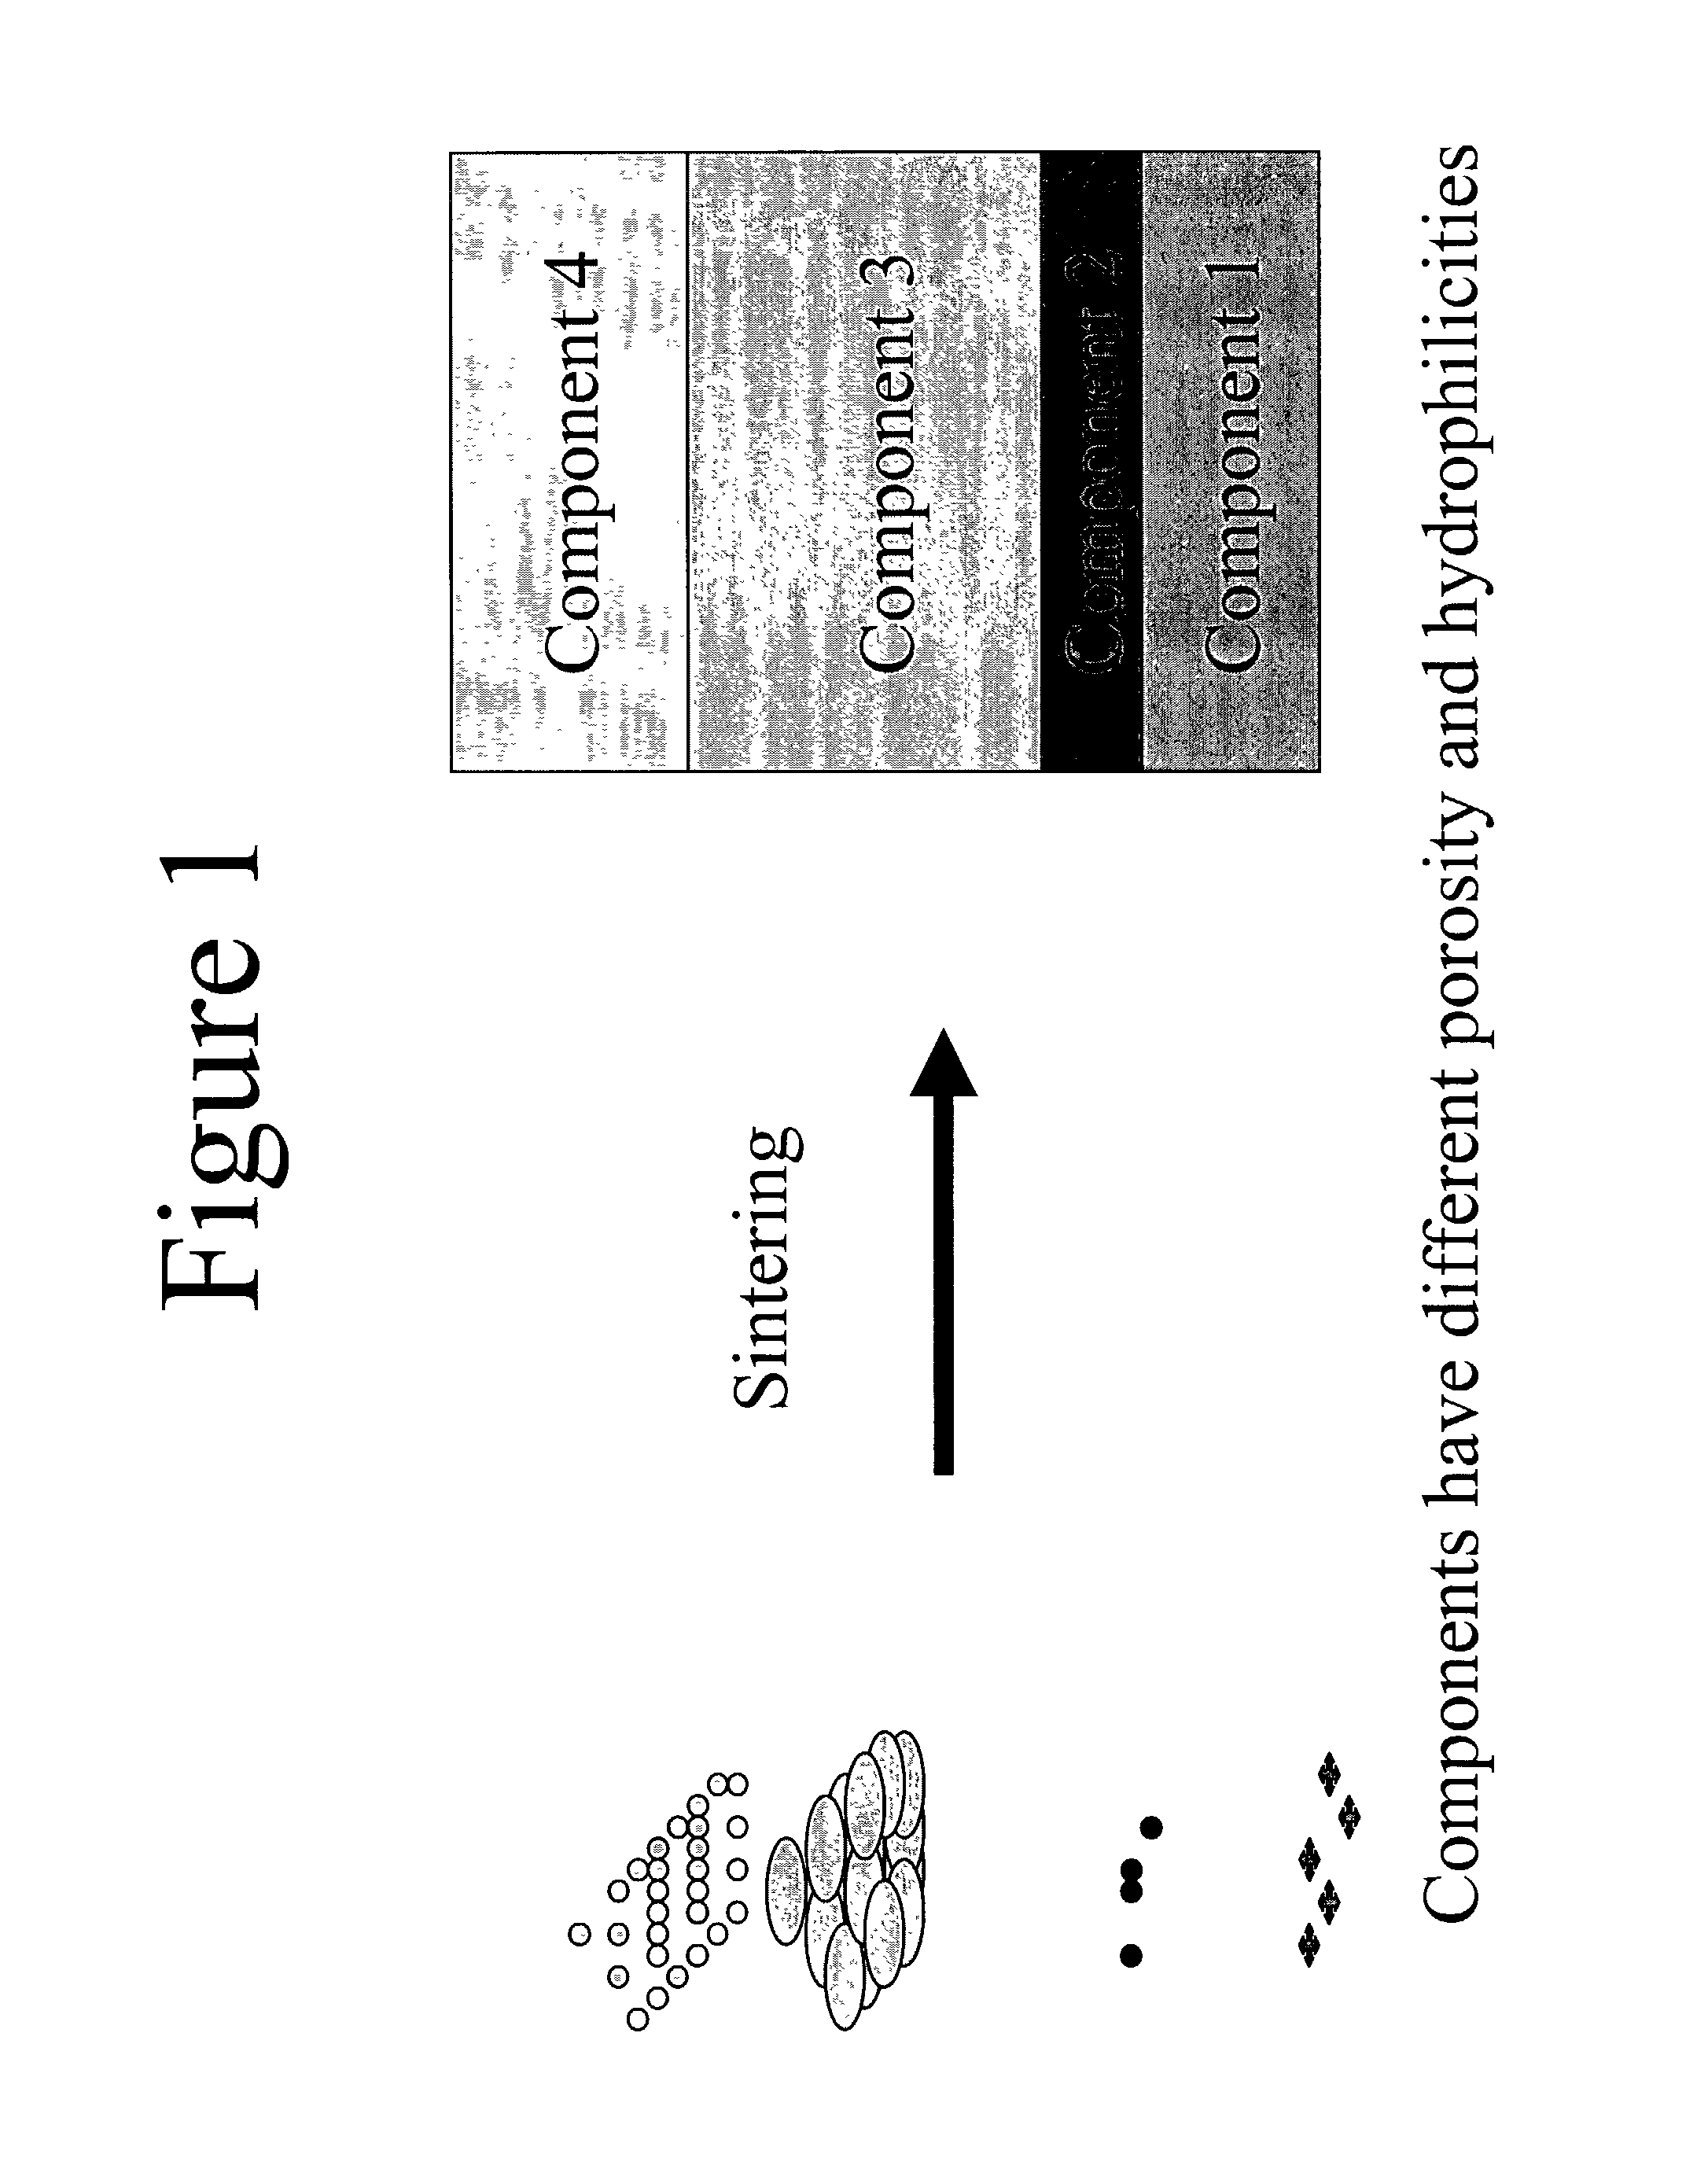 Discrete hydrophilic-hydrophobic porous materials and methods for making the same